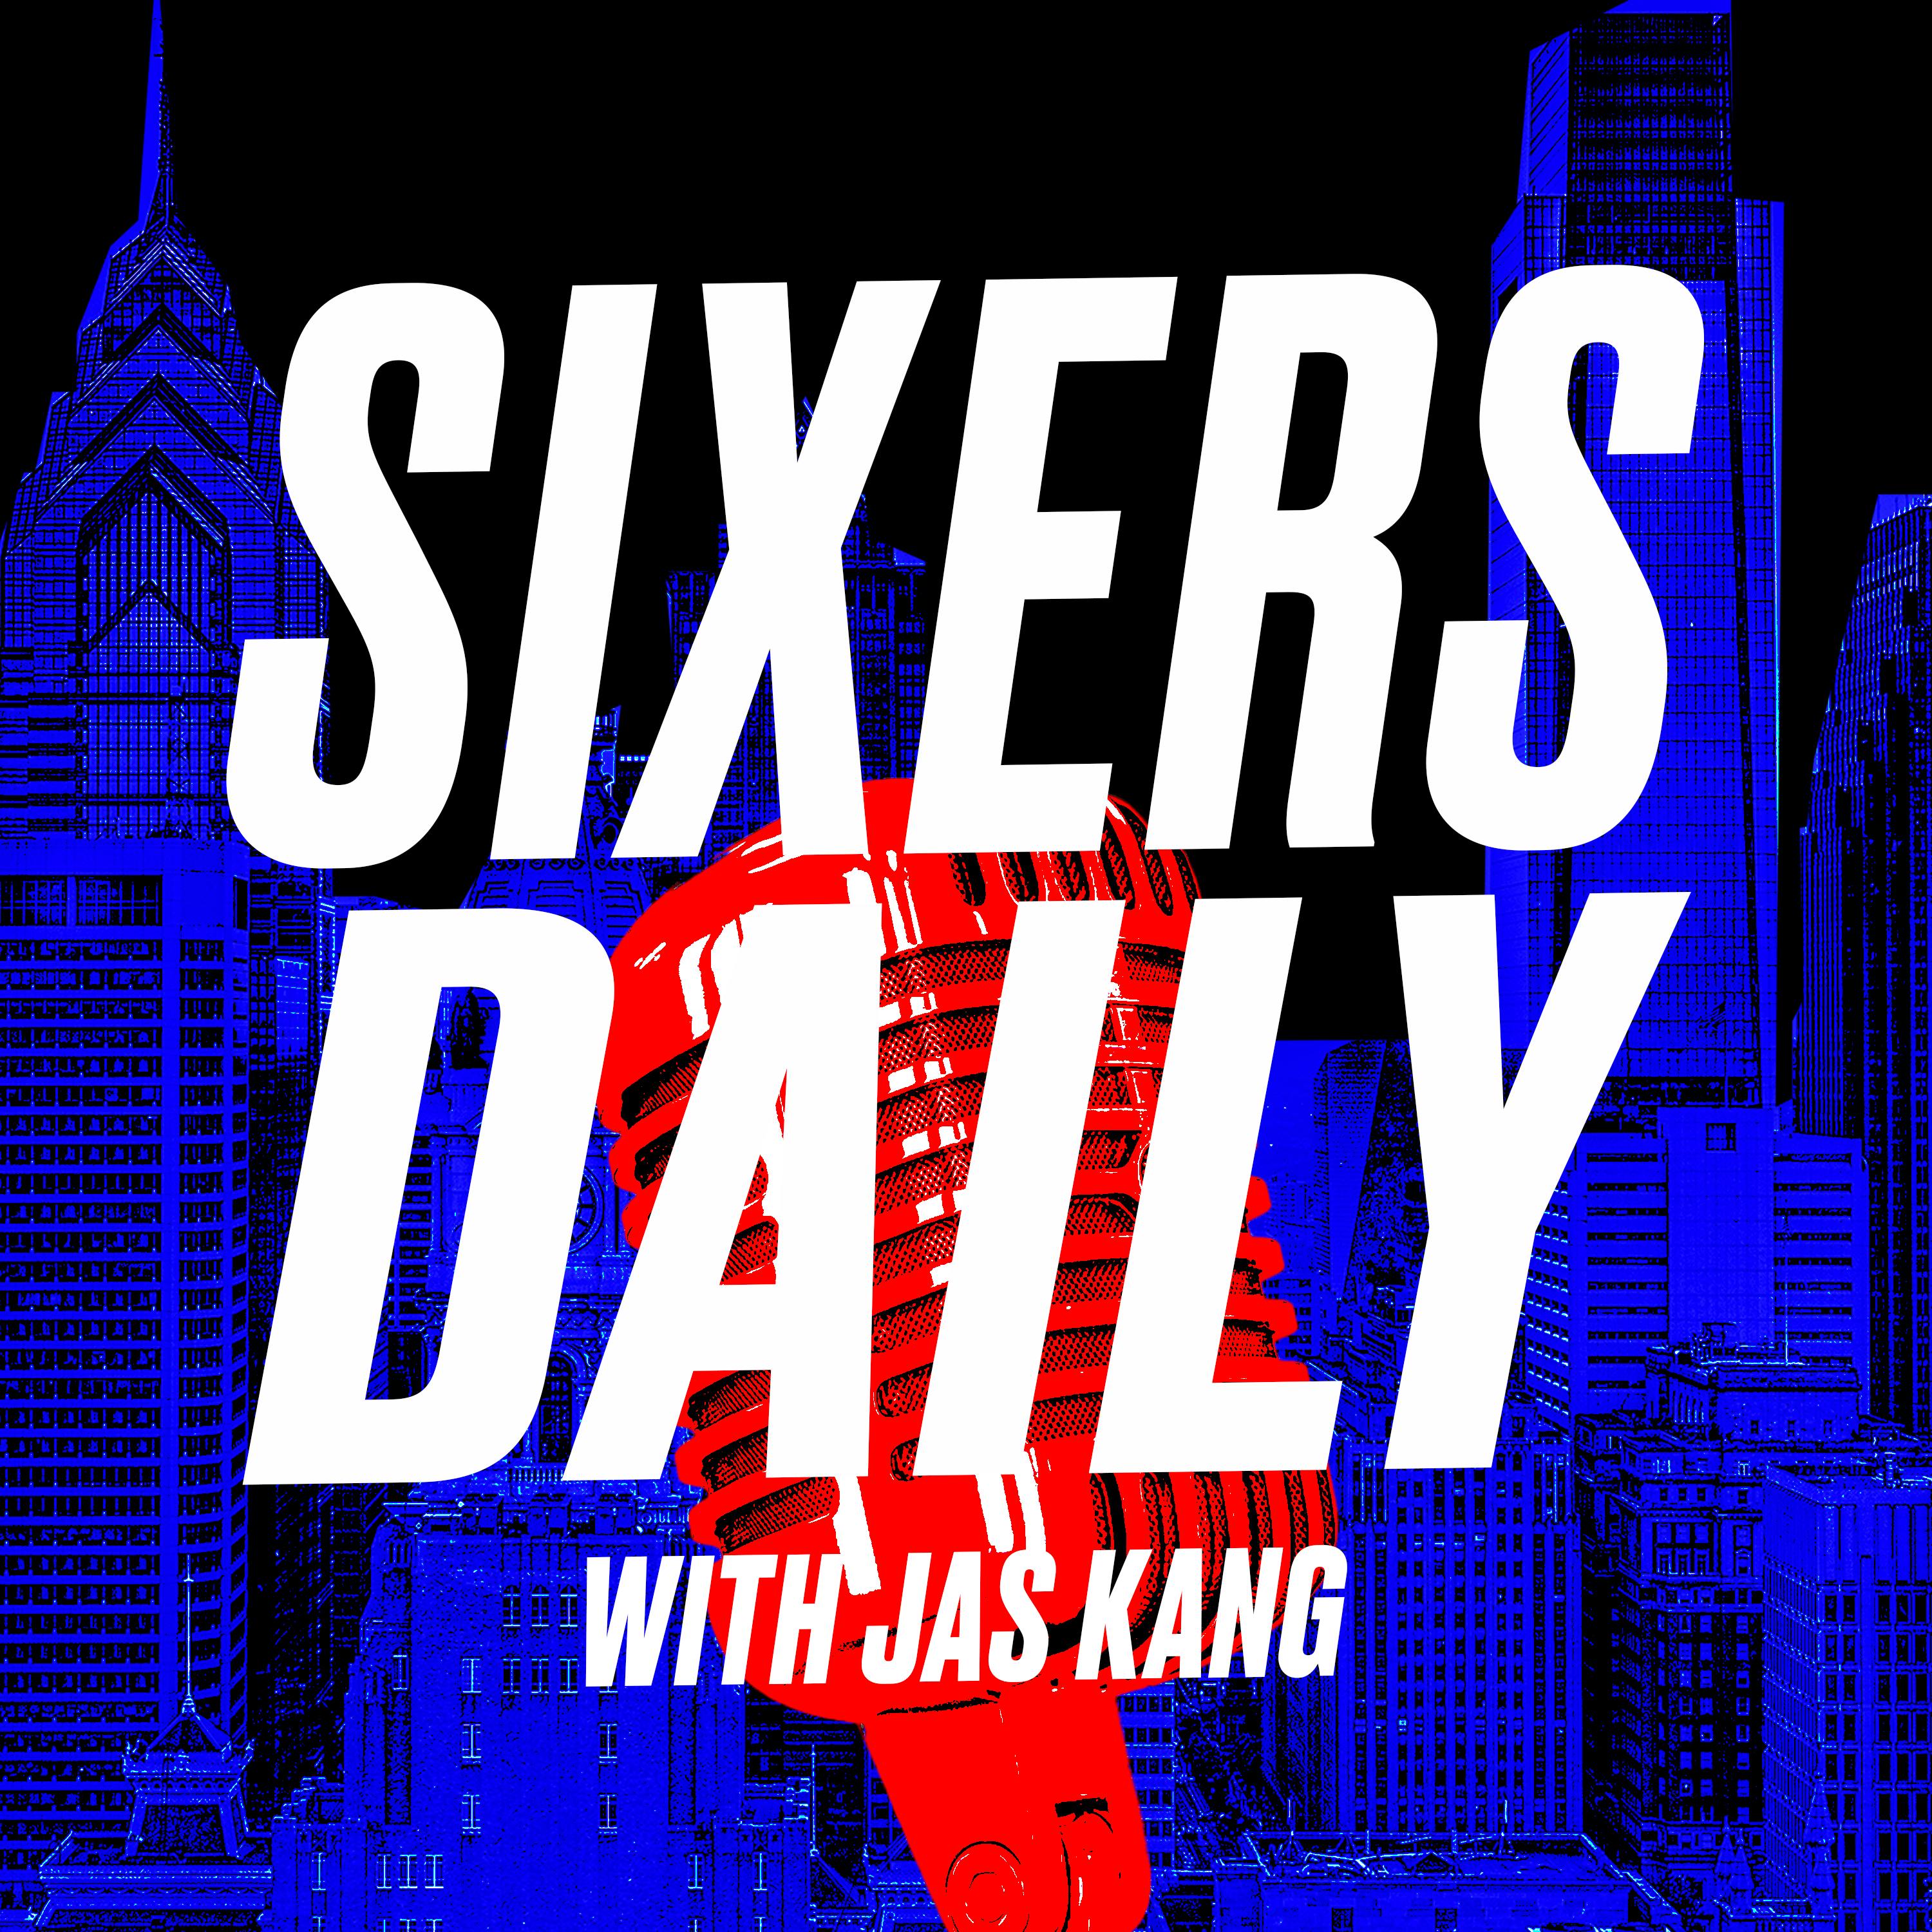 Sixers Daily with Jas Kang - The Grizzles could be a sleeper team in the Kevin Durant sweepstakes, can the Sixers come close to matching an offer for KD? And the latest on James and Harden and Donovan